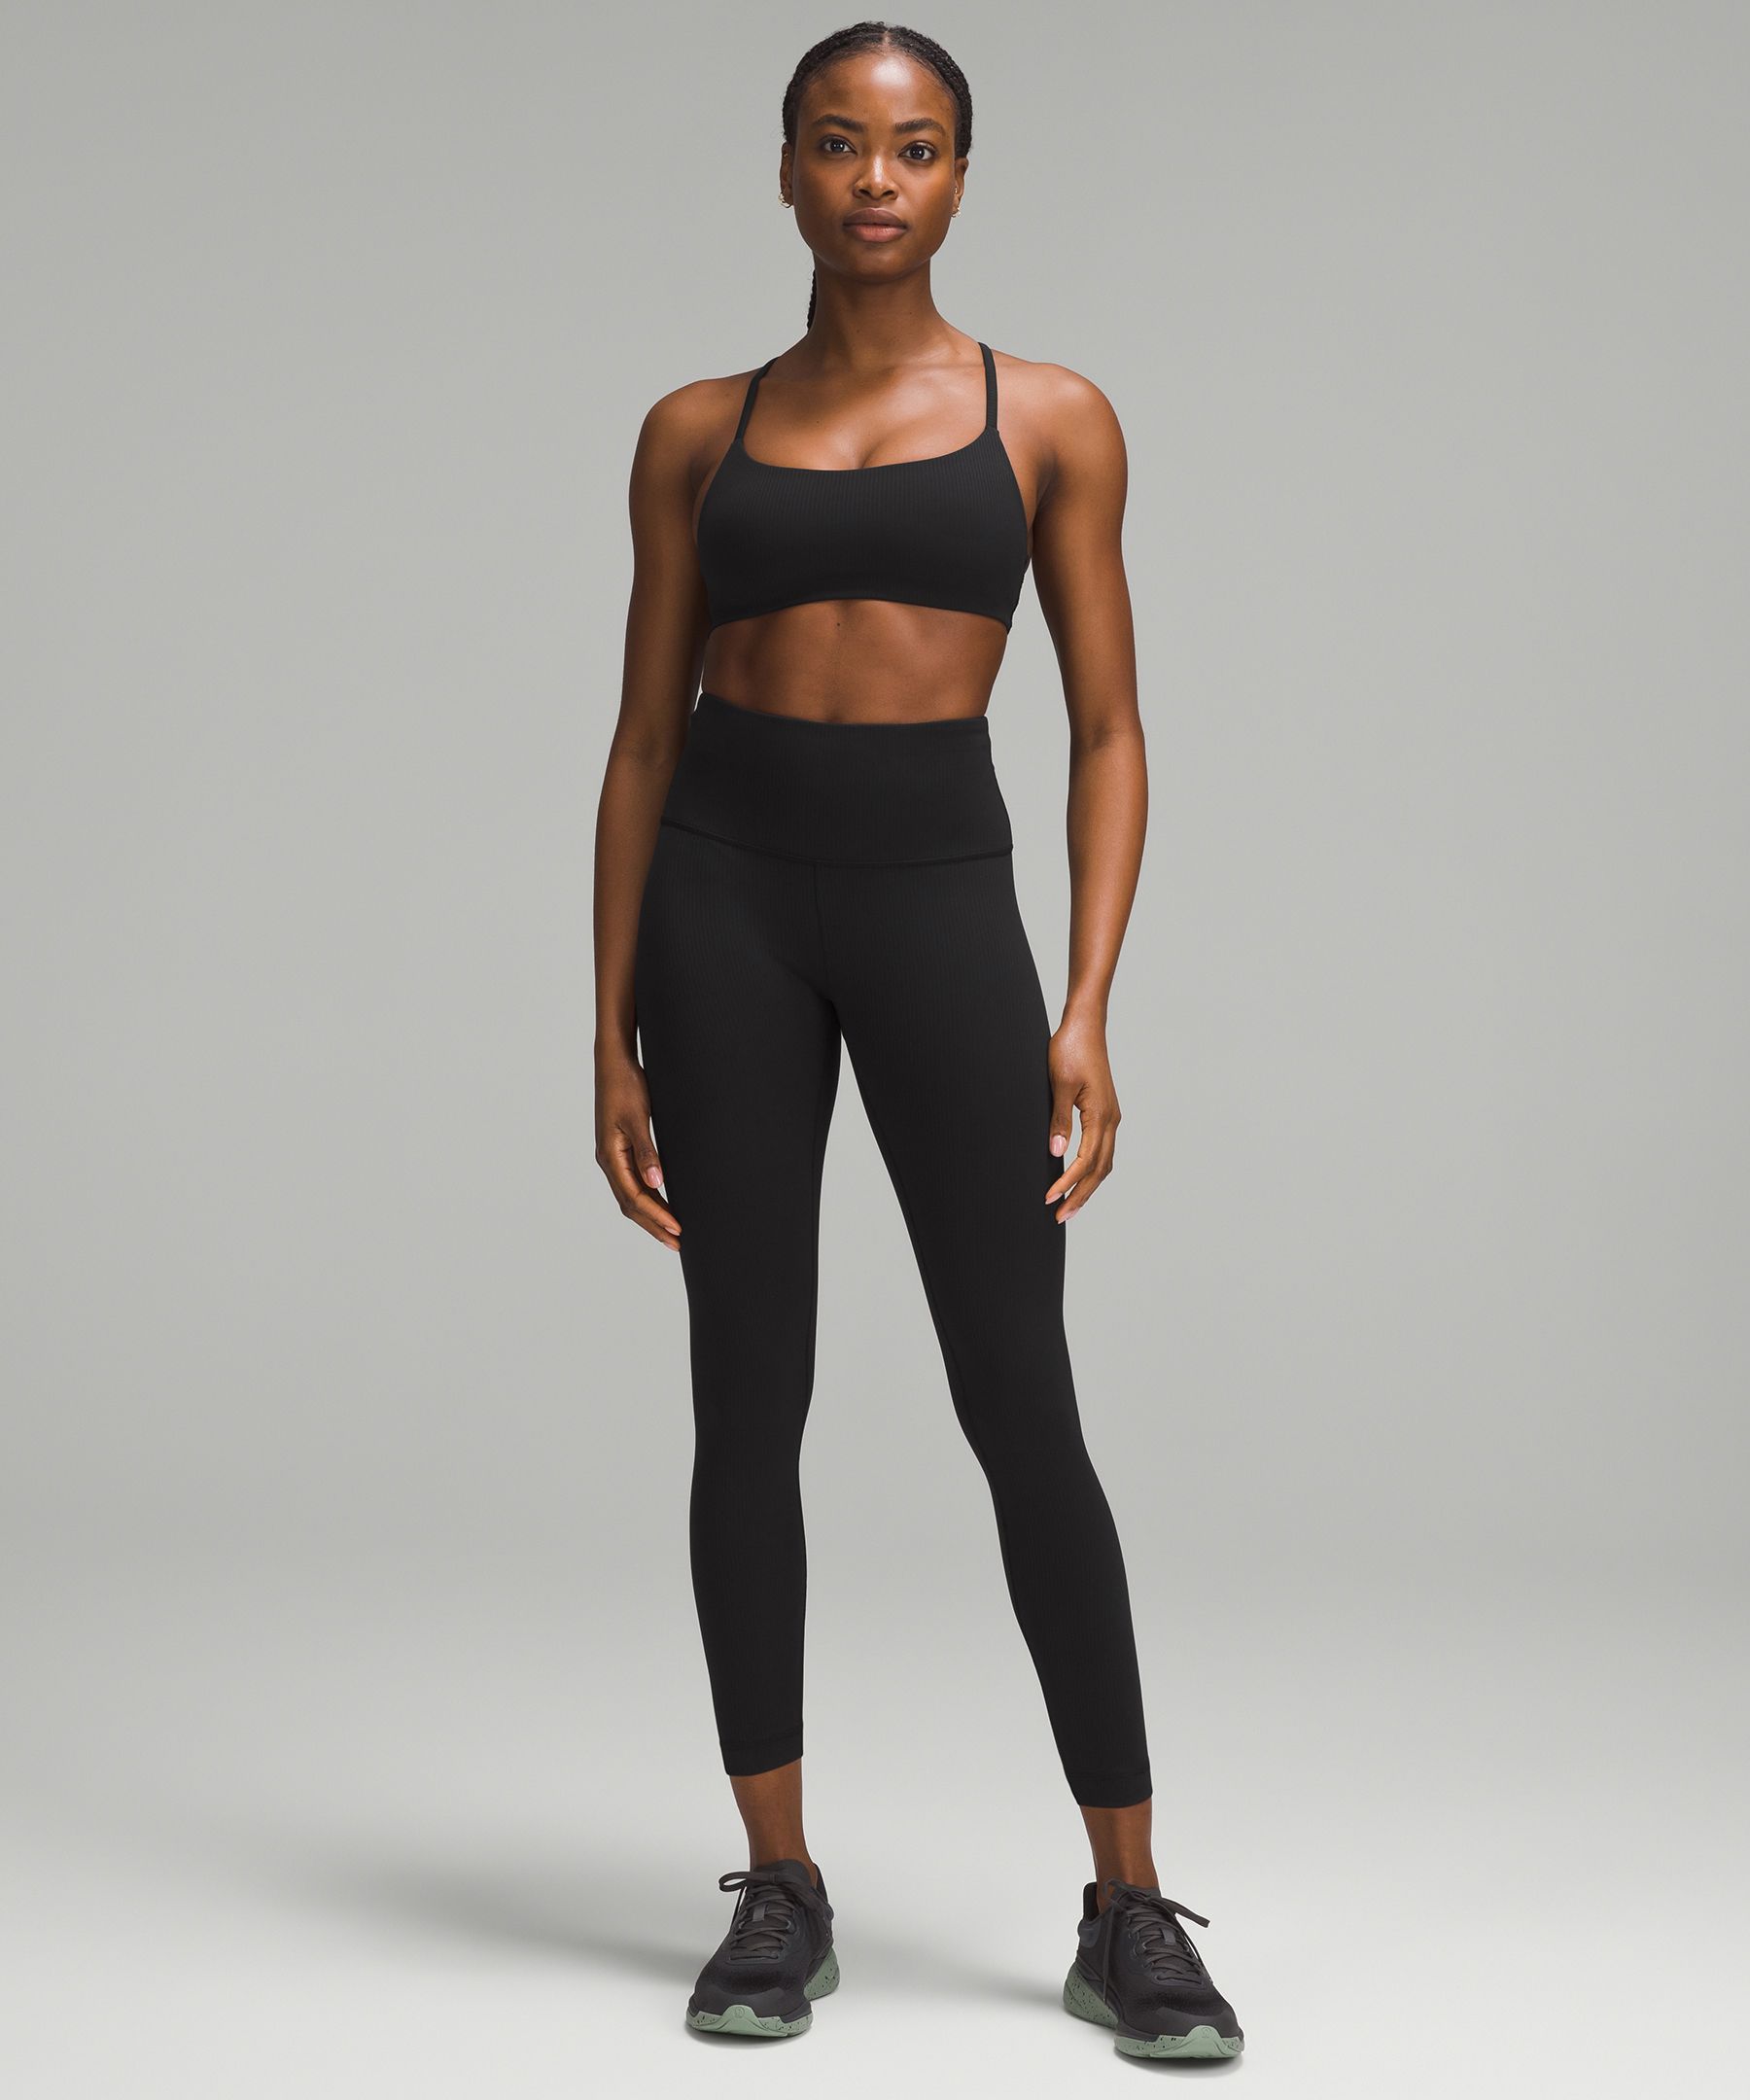 lululemon Southeast Asia - Everlux fabric, coming in hot. New  distraction-free gear for your sweatiest practices. Featured In Movement  7/8 Tight Everlux + Pushing Limits Bra